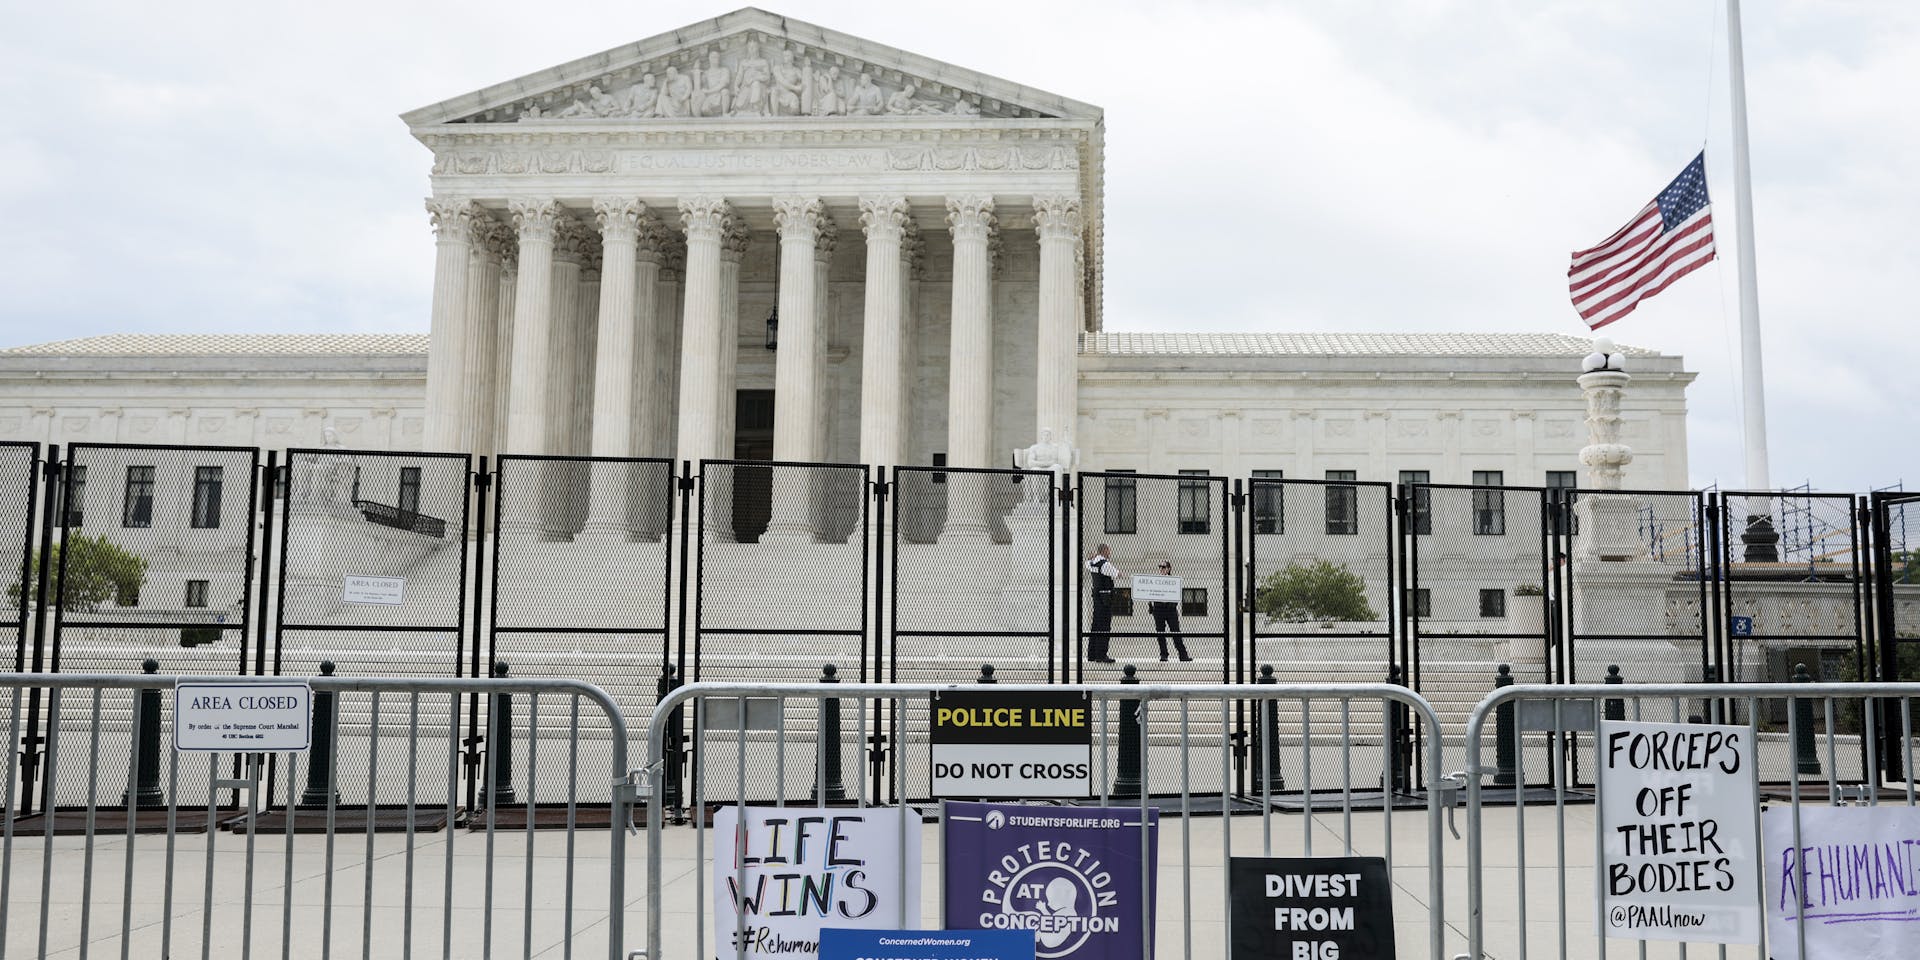 Leaking a Supreme Court draft opinion on abortion or other hot topics is unprecedented – 4 things to know about how the high court works